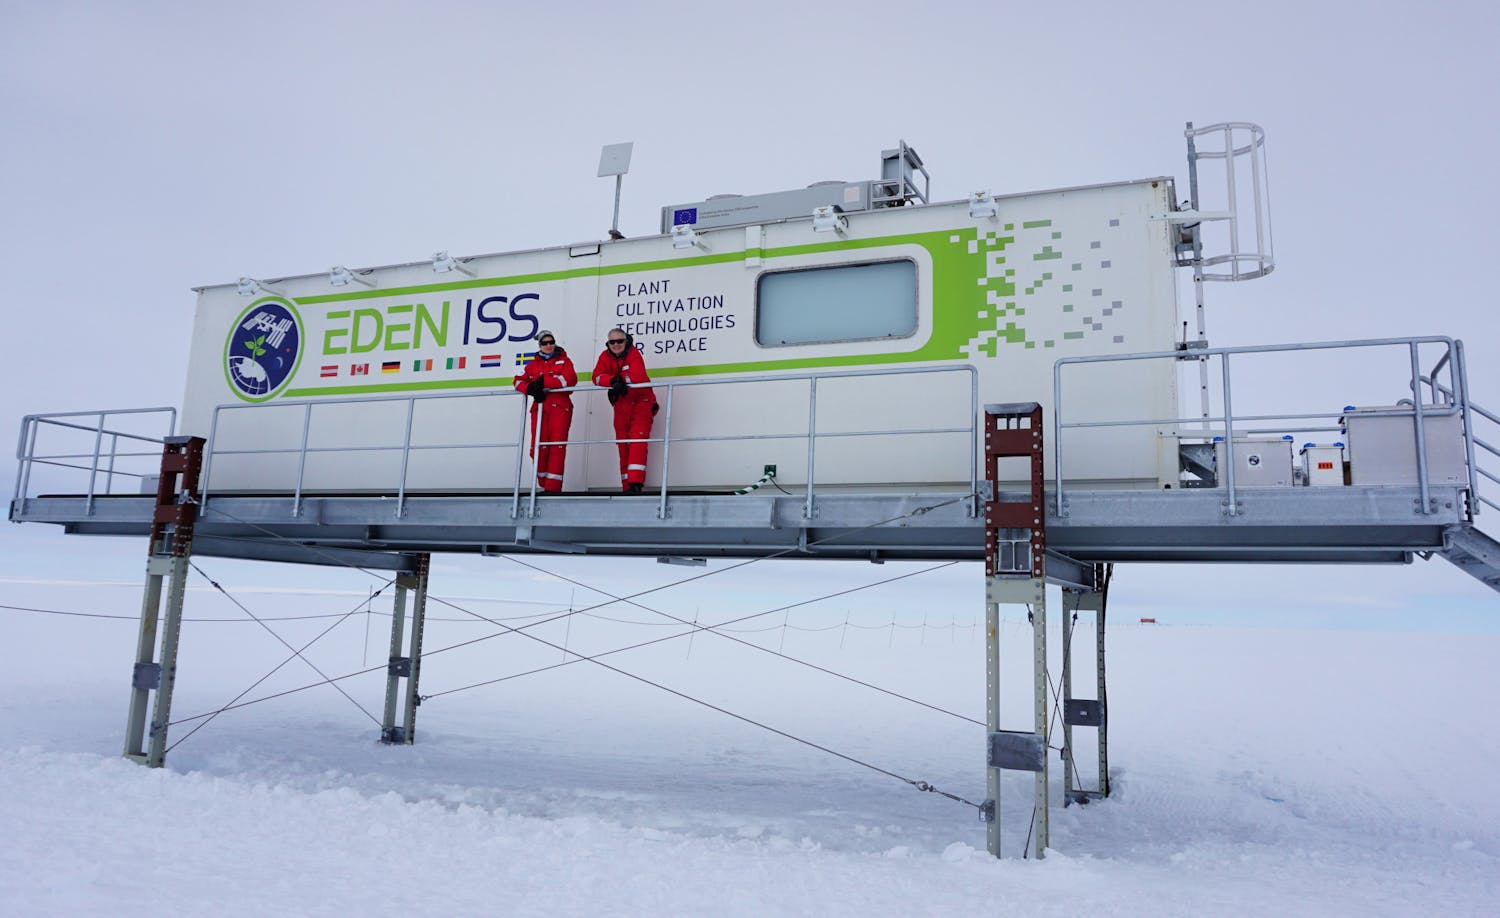 Anna-Lisa Paul (left) and Robert Ferl, (right) the principal investigators of the UF space plants lab, stand outside of the EDEN ISS greenhouse in Antarctica where plants are cultivated in extreme conditions with the goal of learning how to successfully grow plants in space.